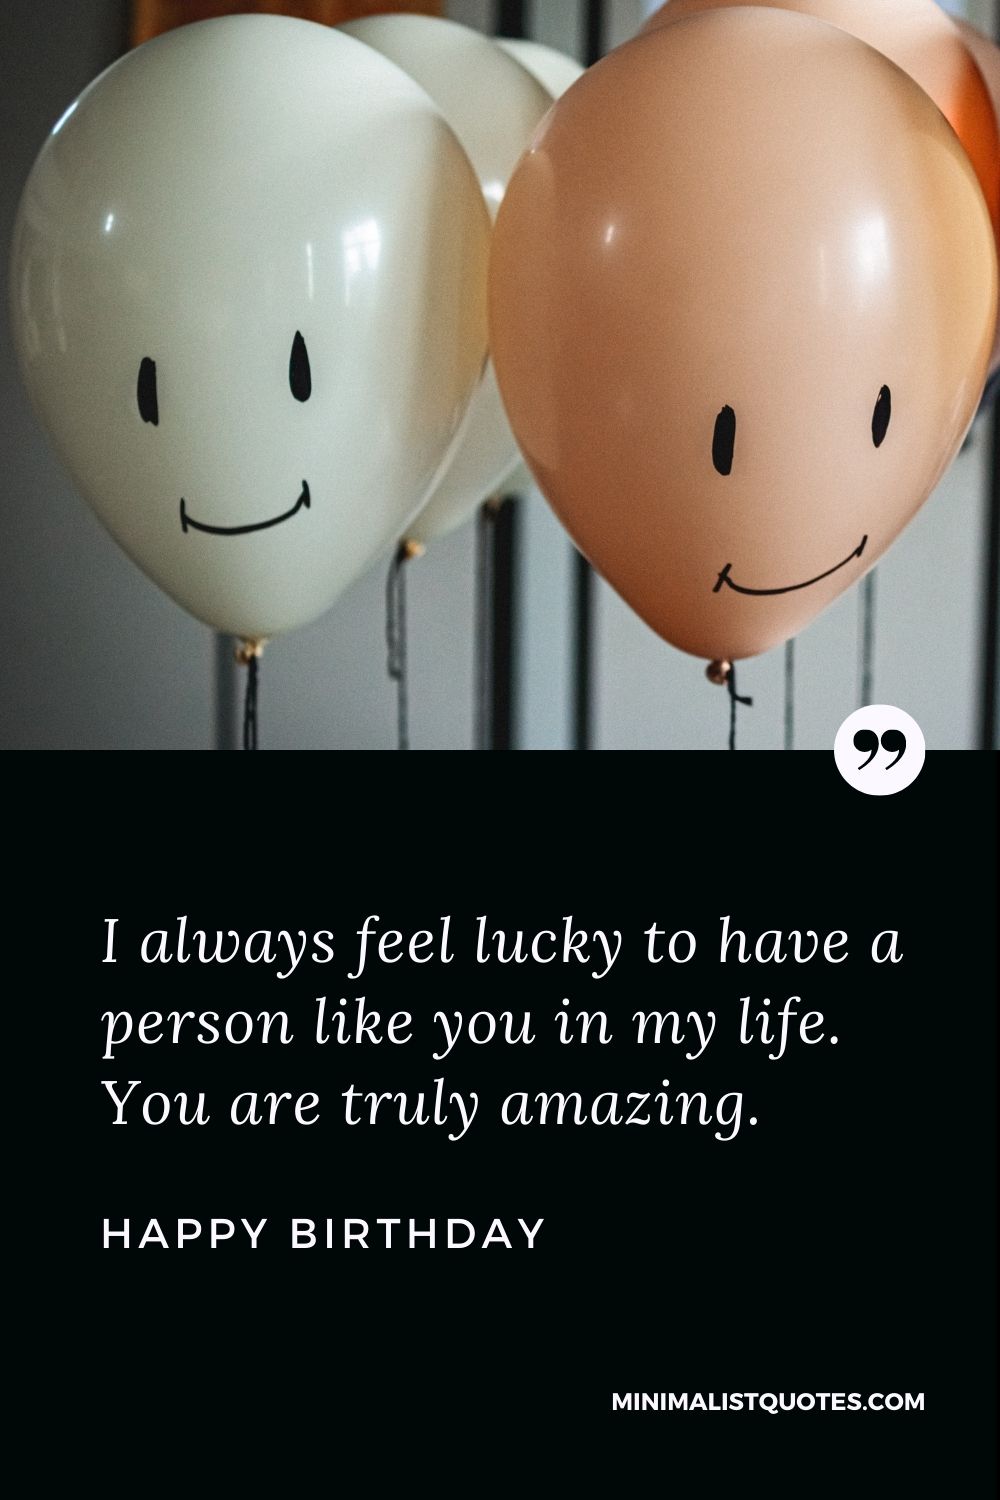 Happy Birthday Wishes - I always feel lucky to have a person like you in my life. You are truly amazing.